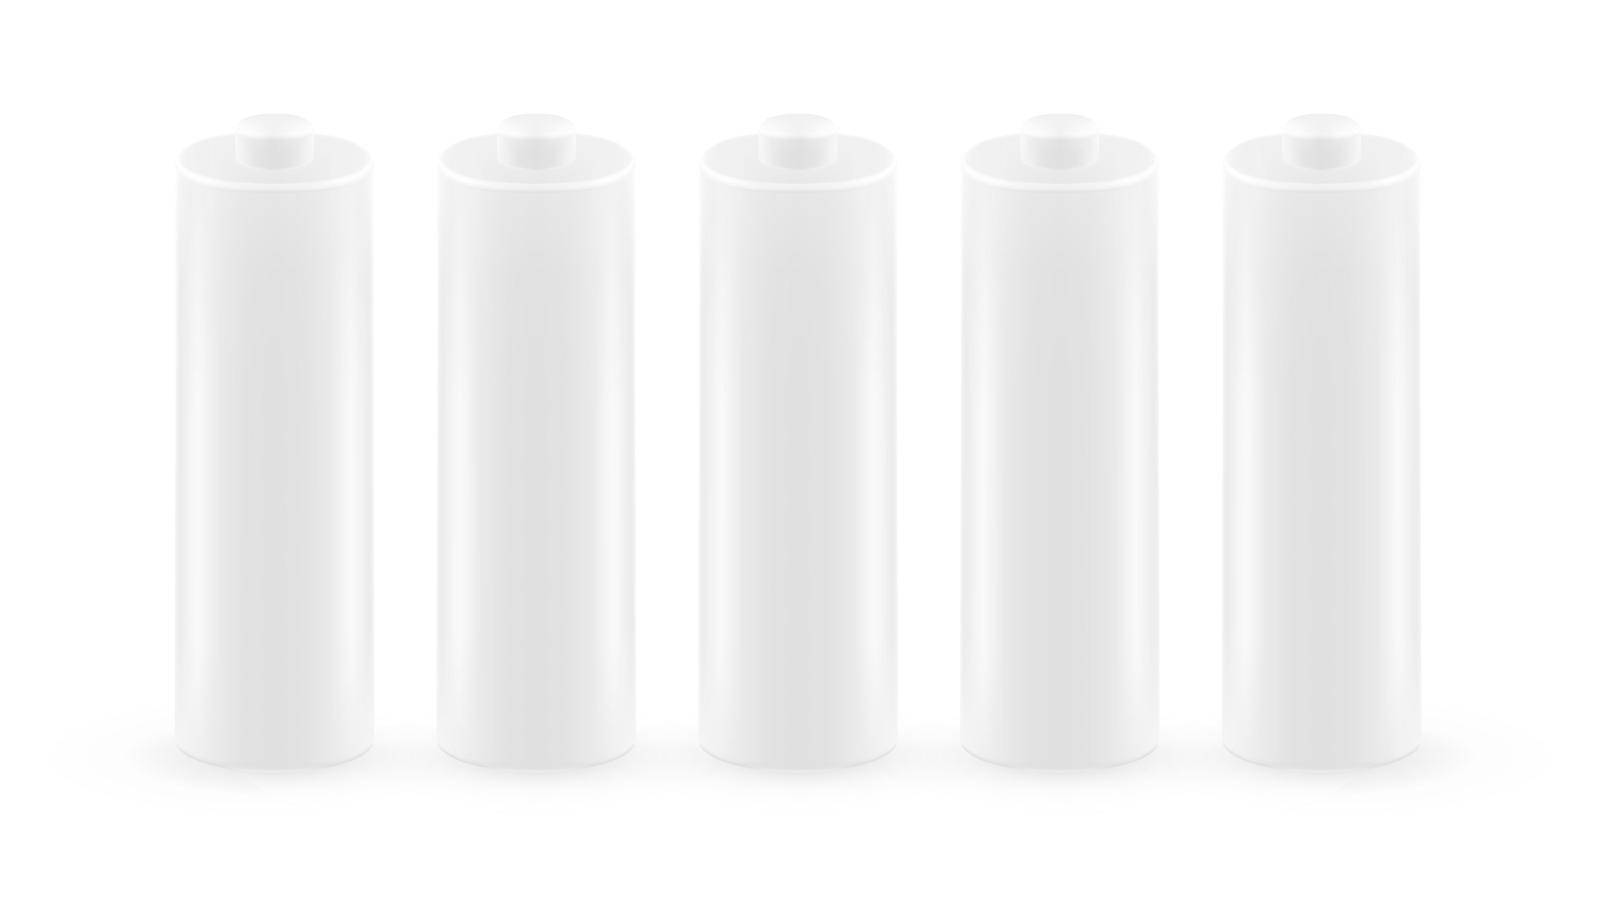 Five Clear White Battery Template. EPS10 Vector